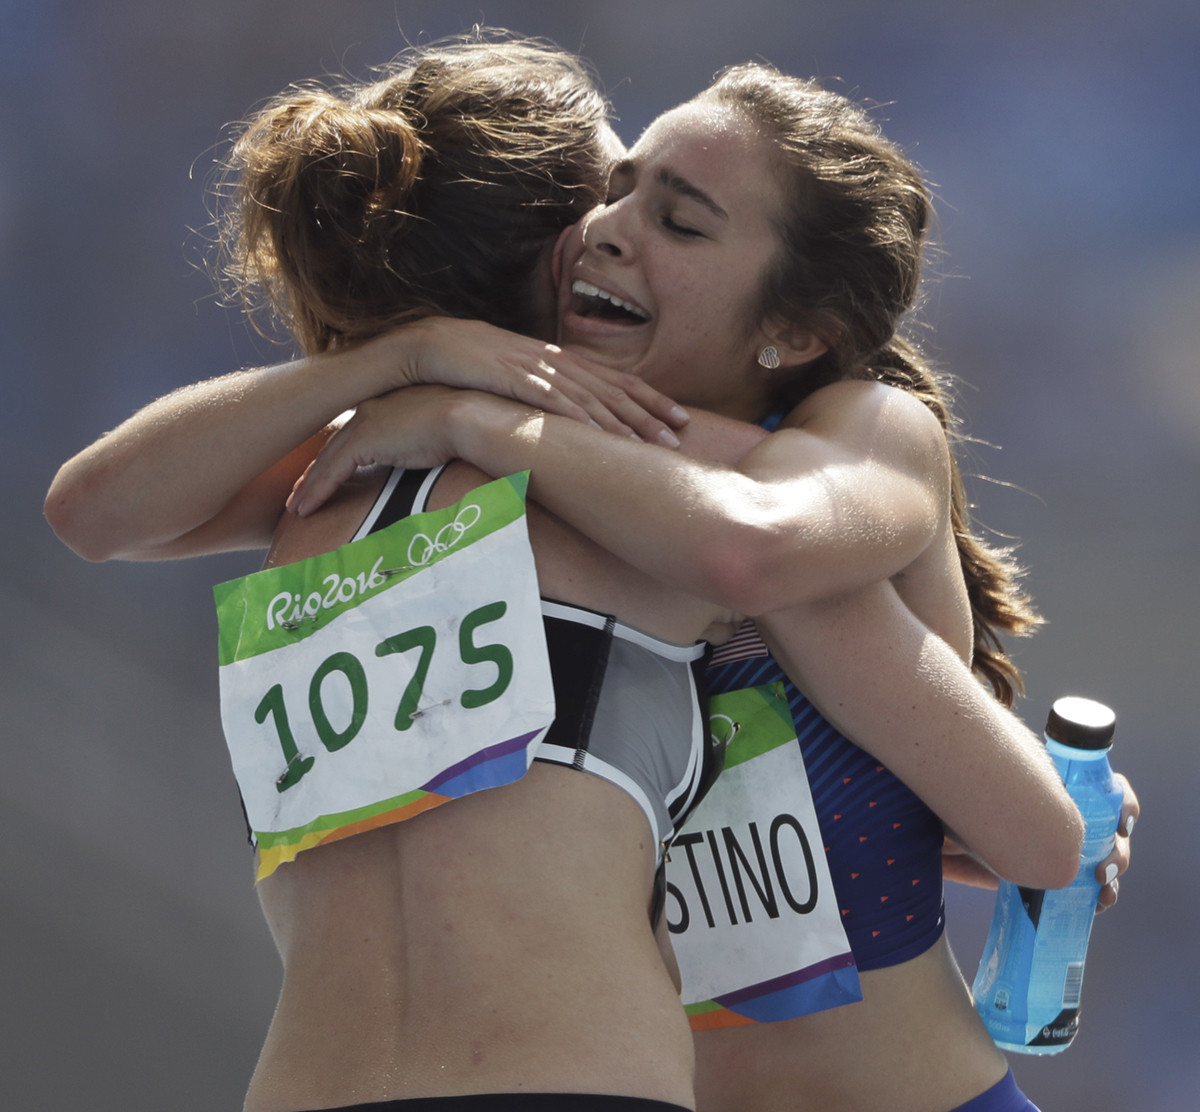 New Zealand's Nikki Hamblin, left, and United States' Abbey D'Agostino after competing in a women's 5000-meter heat during the athletics competitions of the 2016 Summer Olympics at the Olympic stadium in Rio de Janeiro, Brazil, Tuesday, Aug. 16, 2016. (AP Photo/David J. Phillip)